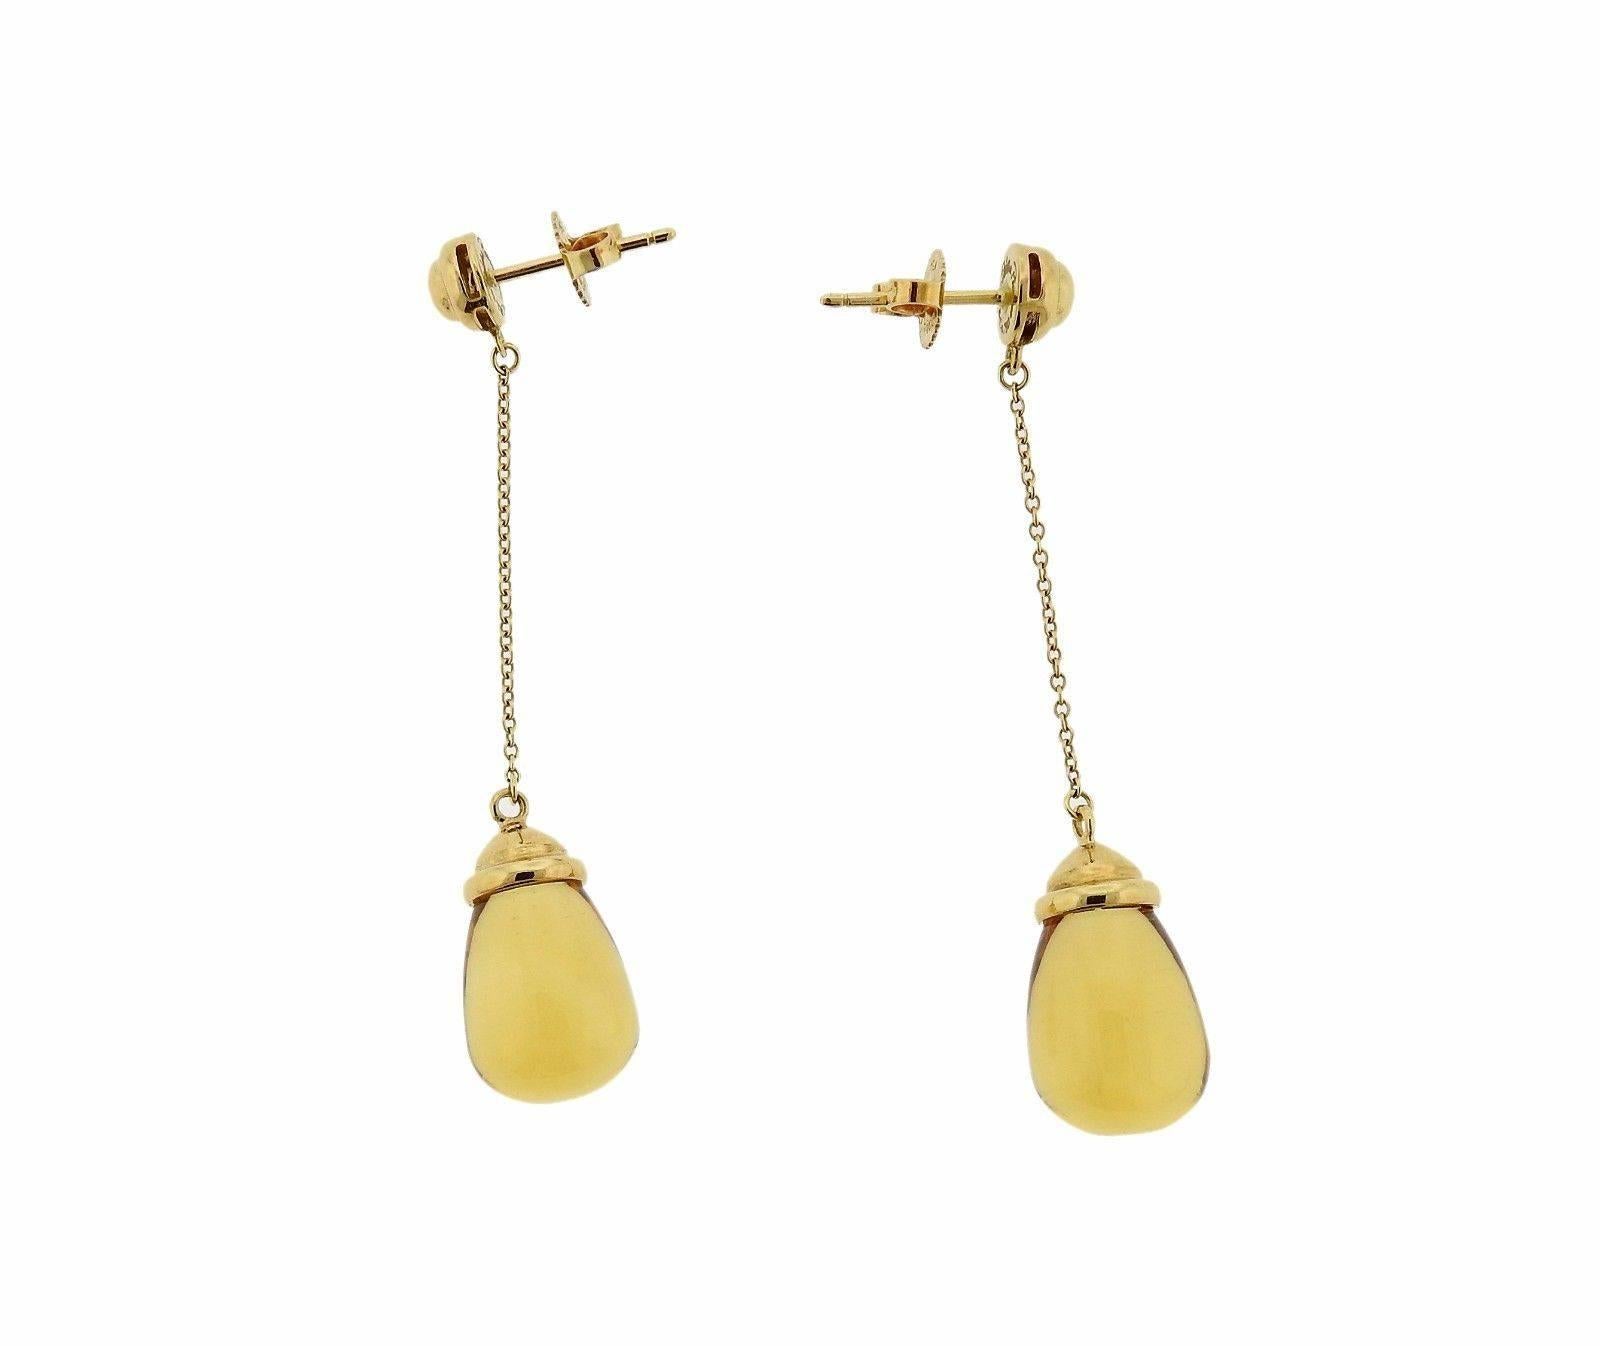 A pair of 18K gold earrings set with citrines.  The earrings measure 52mm long x 10.2mm at widest point.  The weight of the pair is 8.5 grams.  Marked: T & Co. 750 Paloma Picasso.